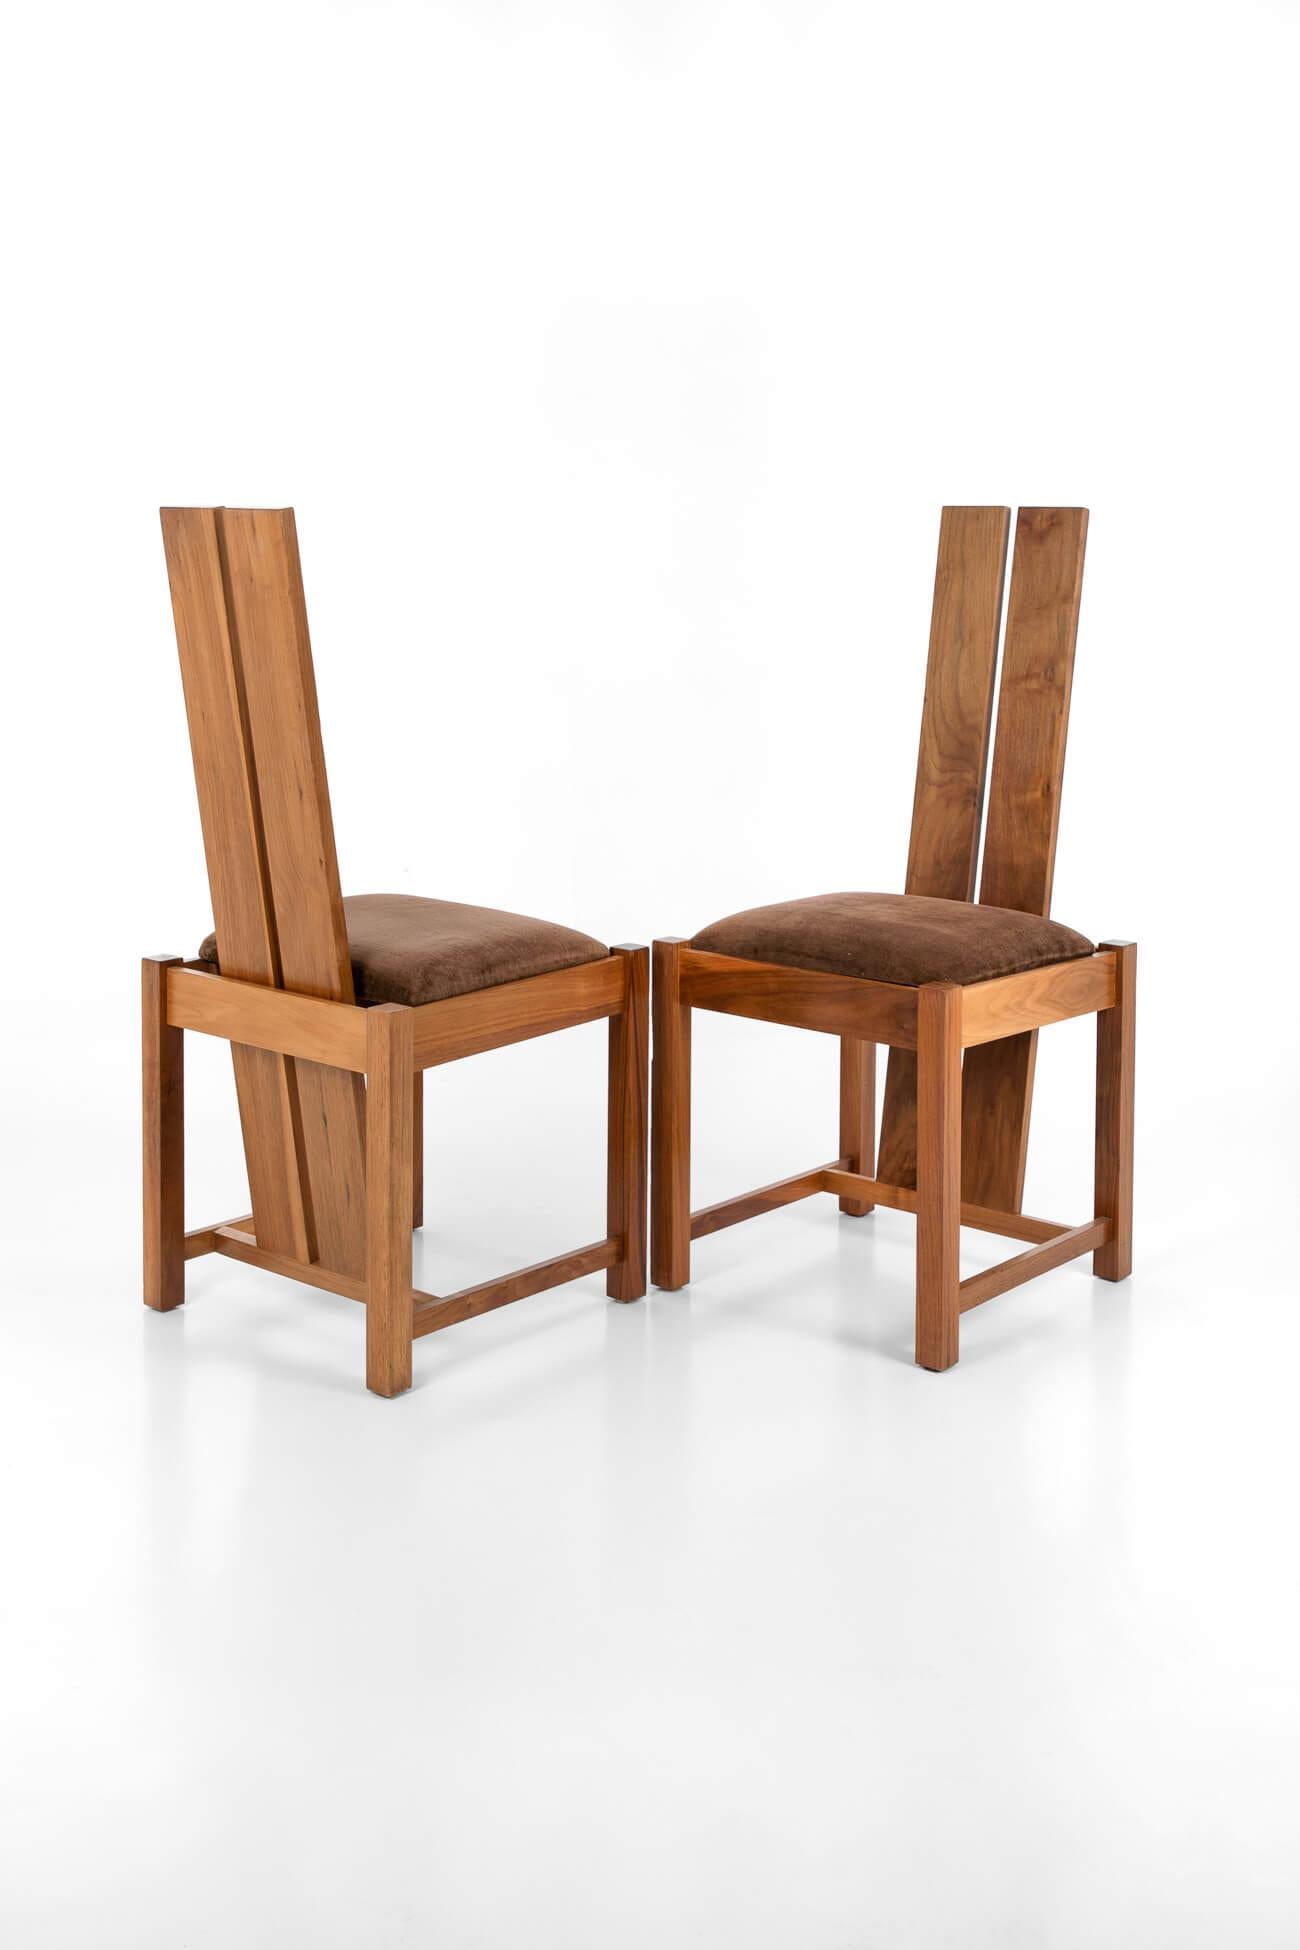 Set of four Samuel Chan Alba high back dining chairs, designed for Channels of Chelsea. In solid walnut with the original upholstery, in very good condition with light wear consistent with age. Stamped with the Channels of Chelsea makers mark. Price